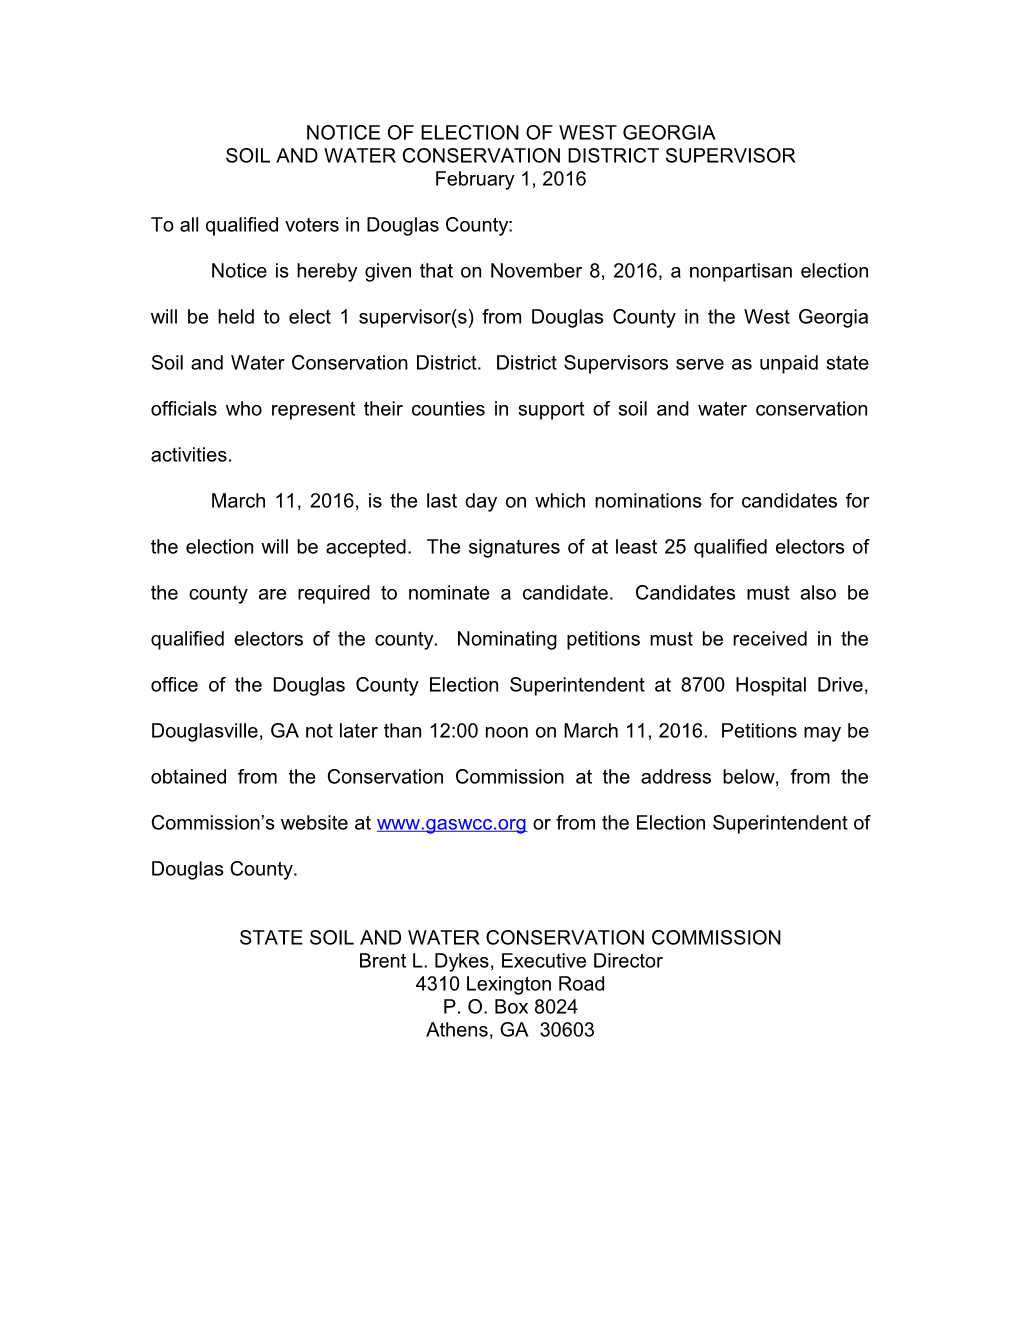 NOTICE of ELECTION of West Georgia